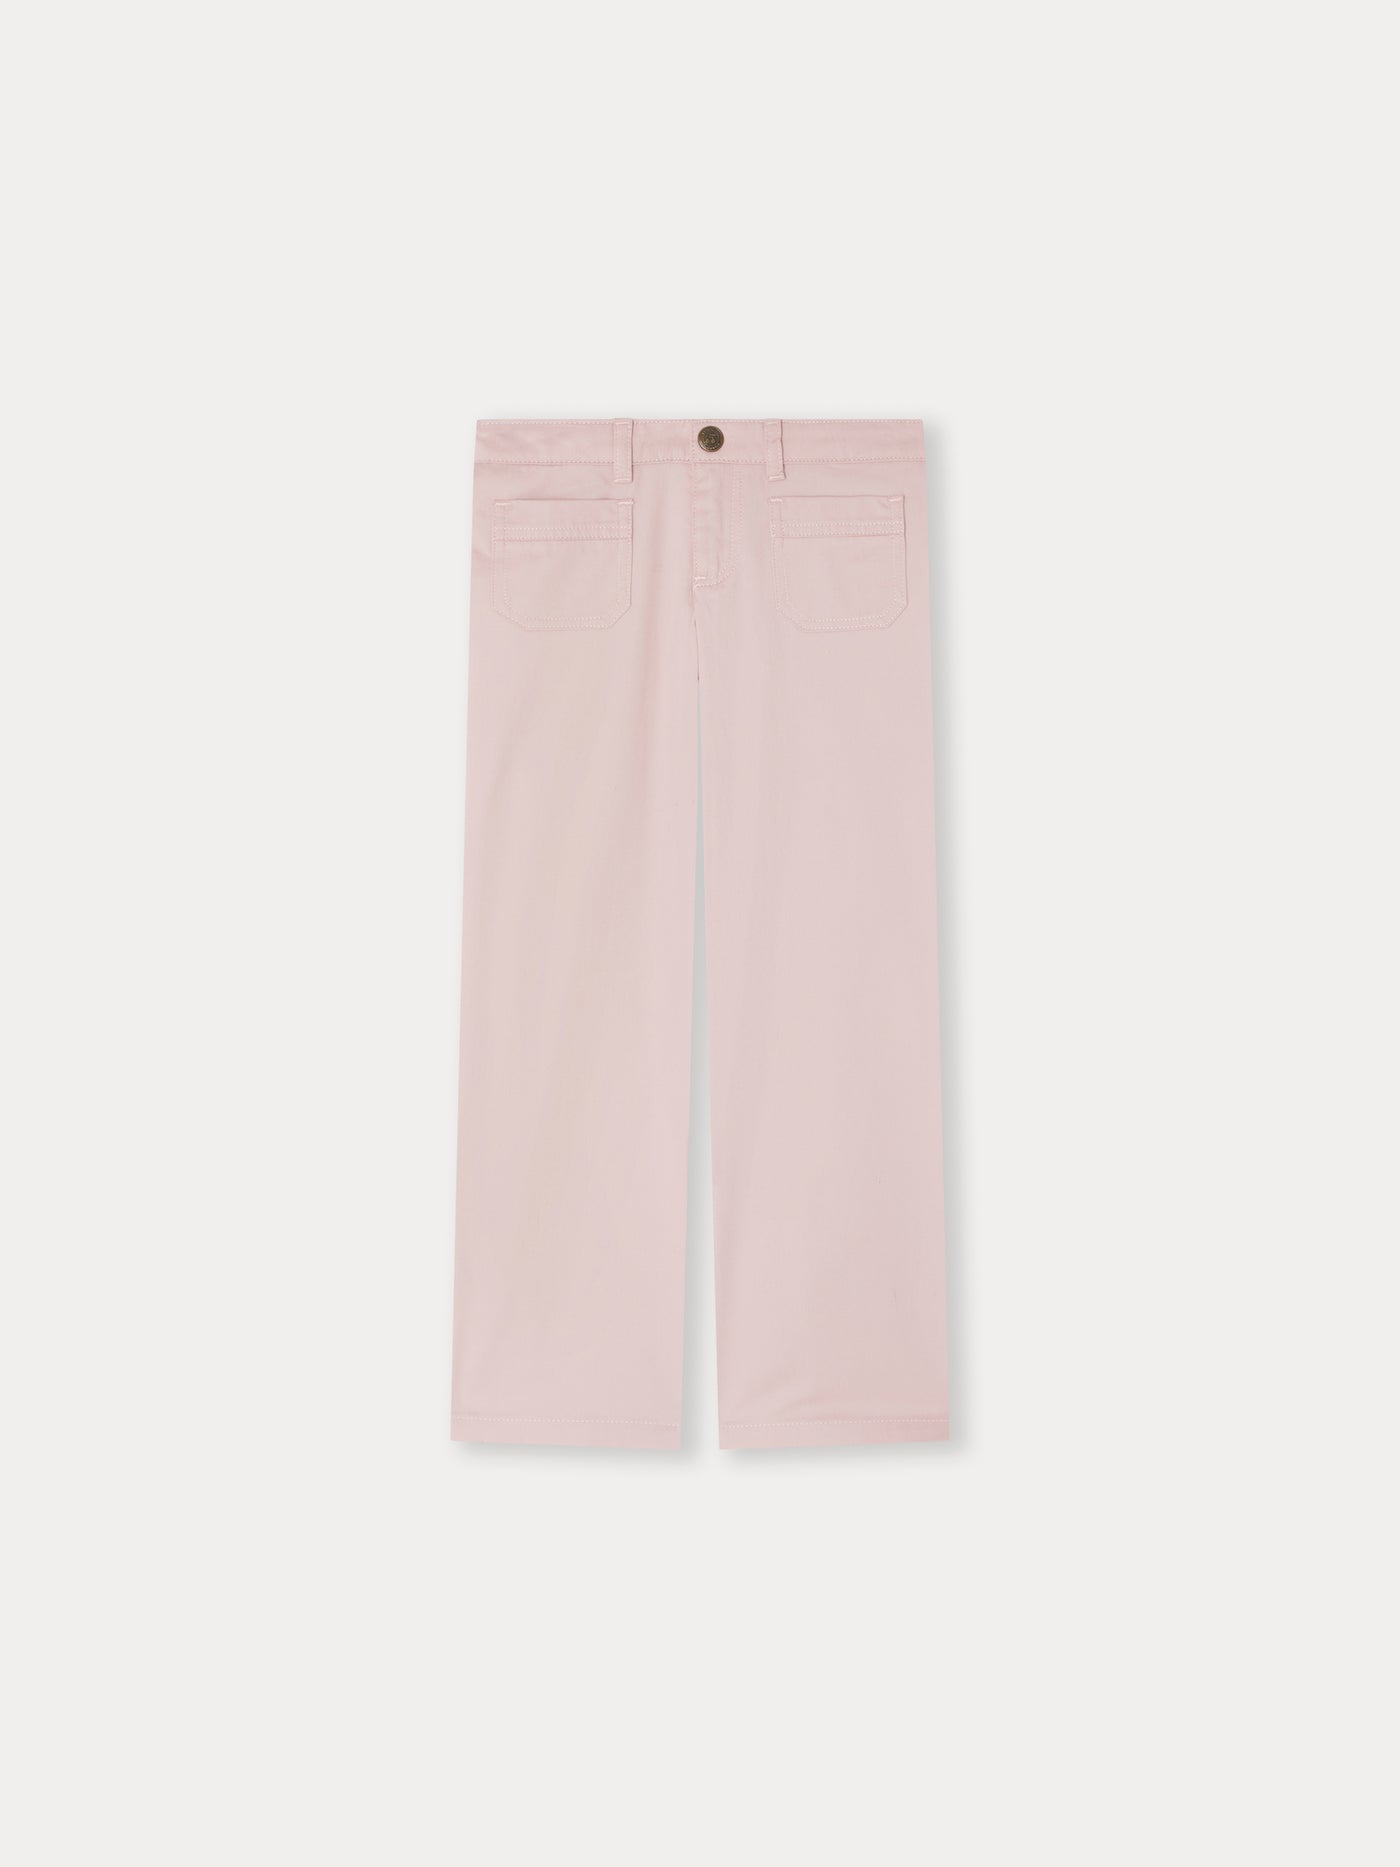 Junon Pants faded pink